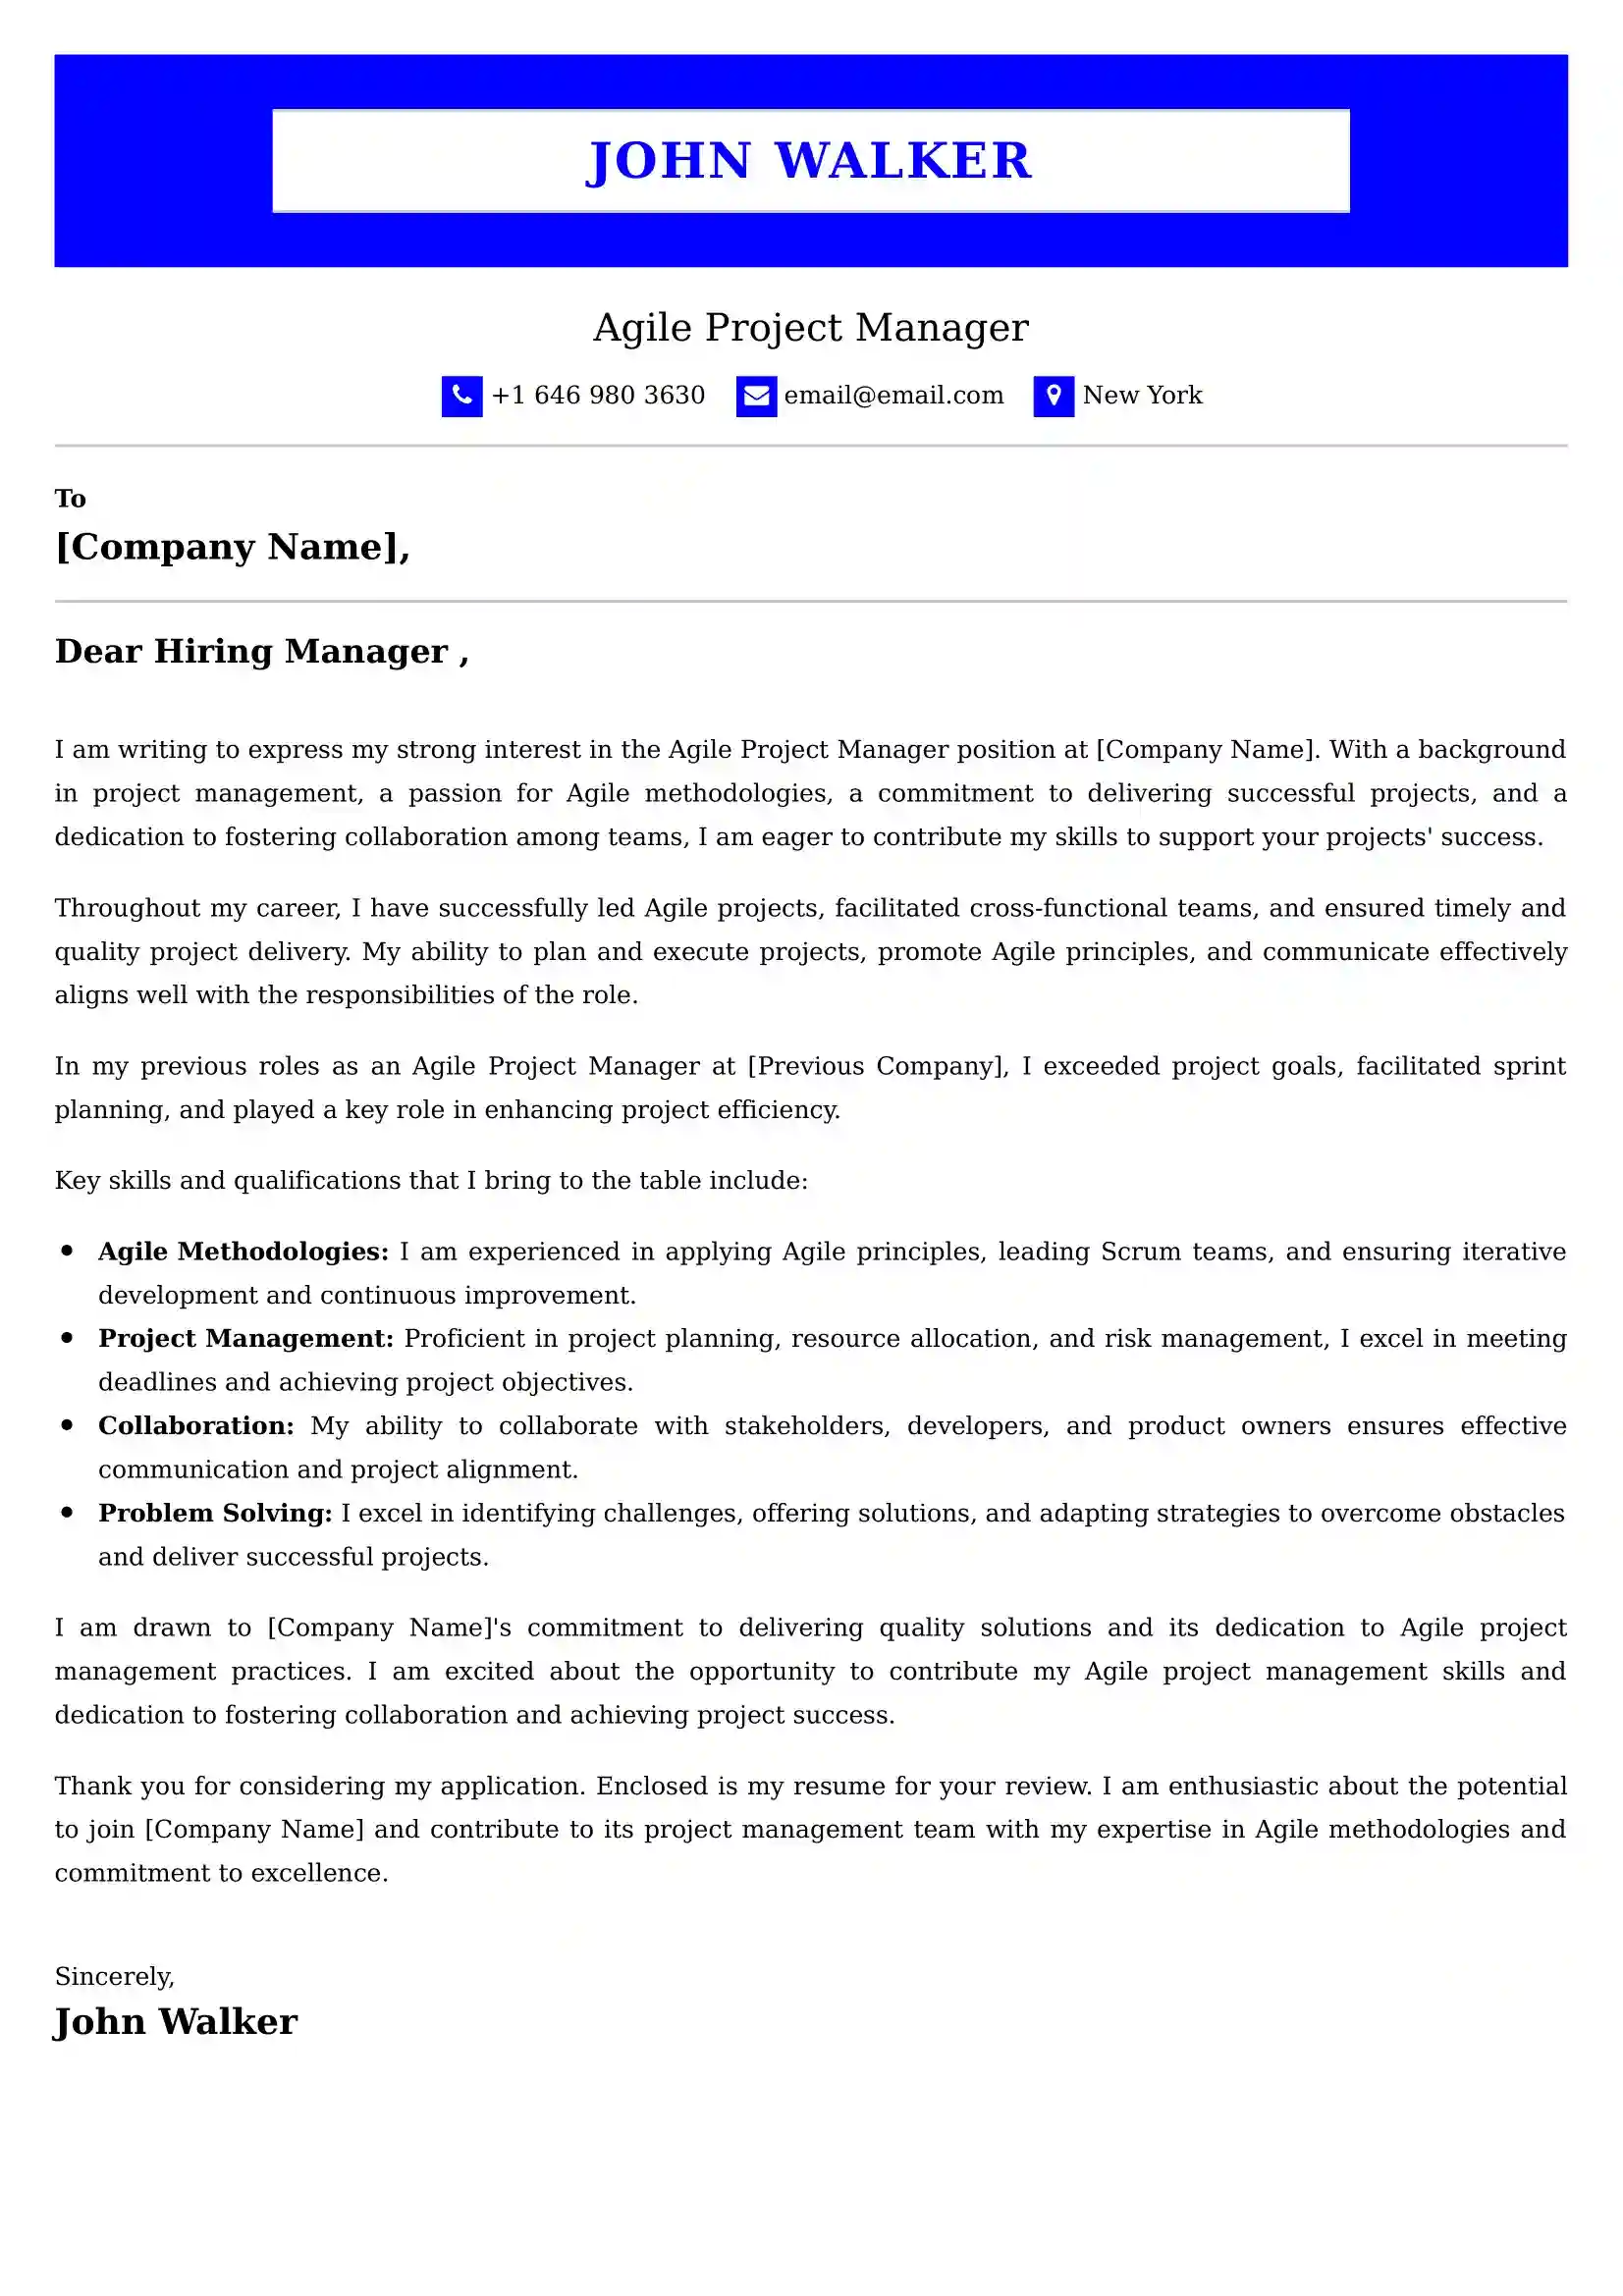 Agile Project Manager Cover Letter Examples UK - Tips and Guide